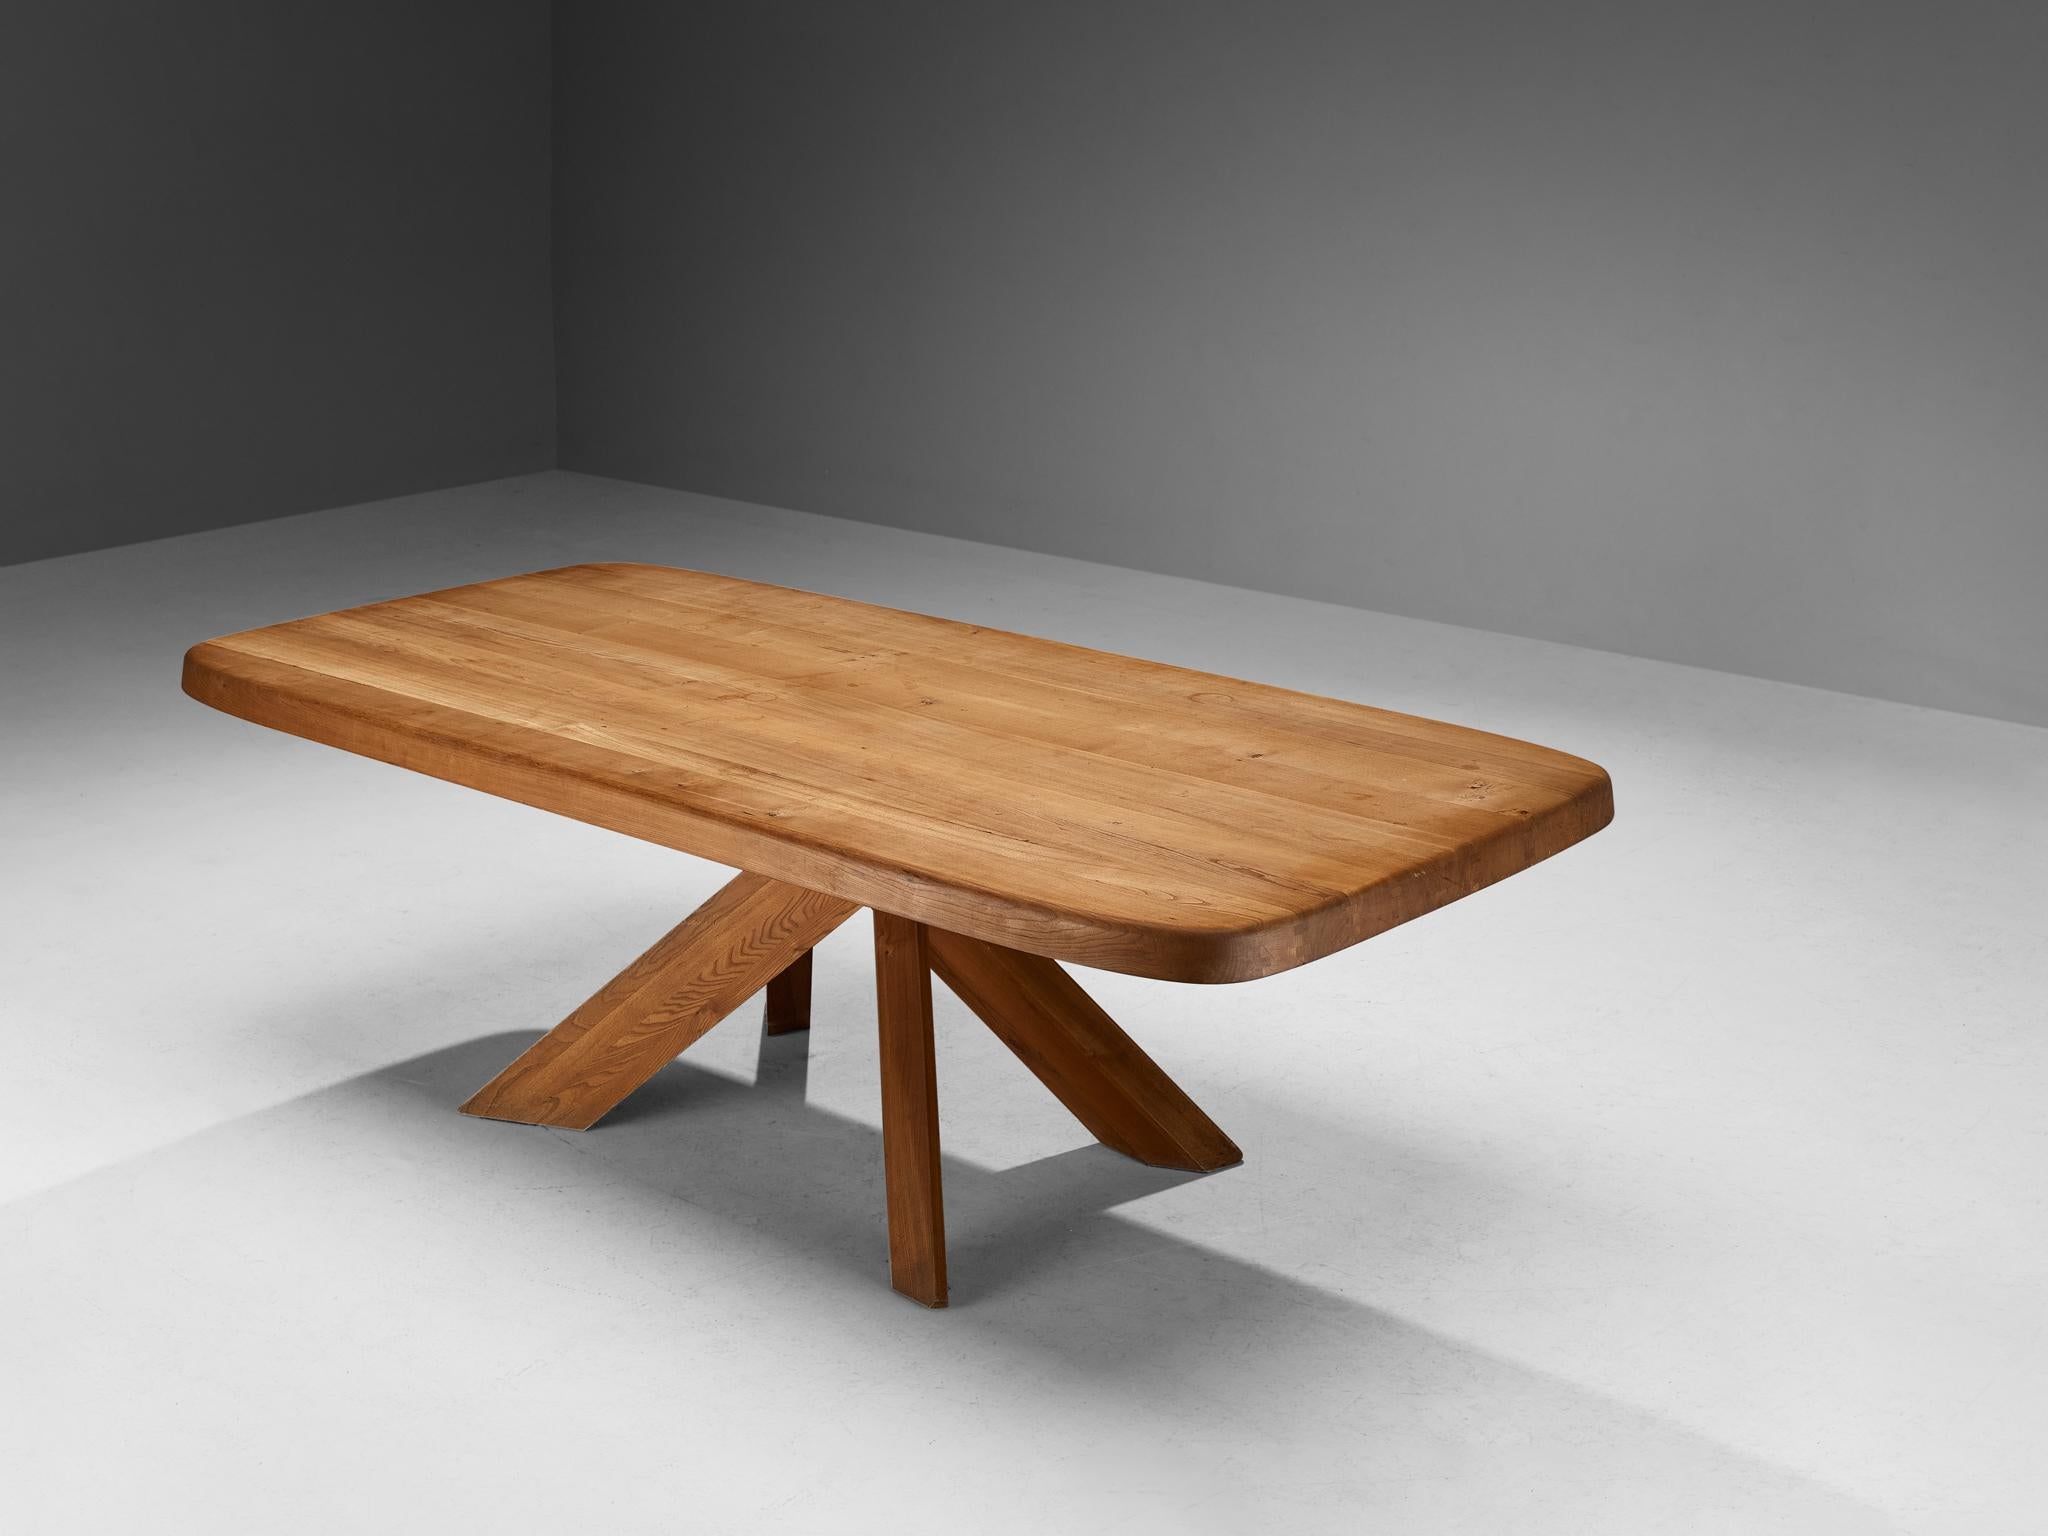 Pierre Chapo, dining table model 'Aban' T35D, solid elm, France, circa 1972 

This design is an early edition, created according to the original craft methodology of Pierre Chapo. The basic design and construction, as well as the use of solid